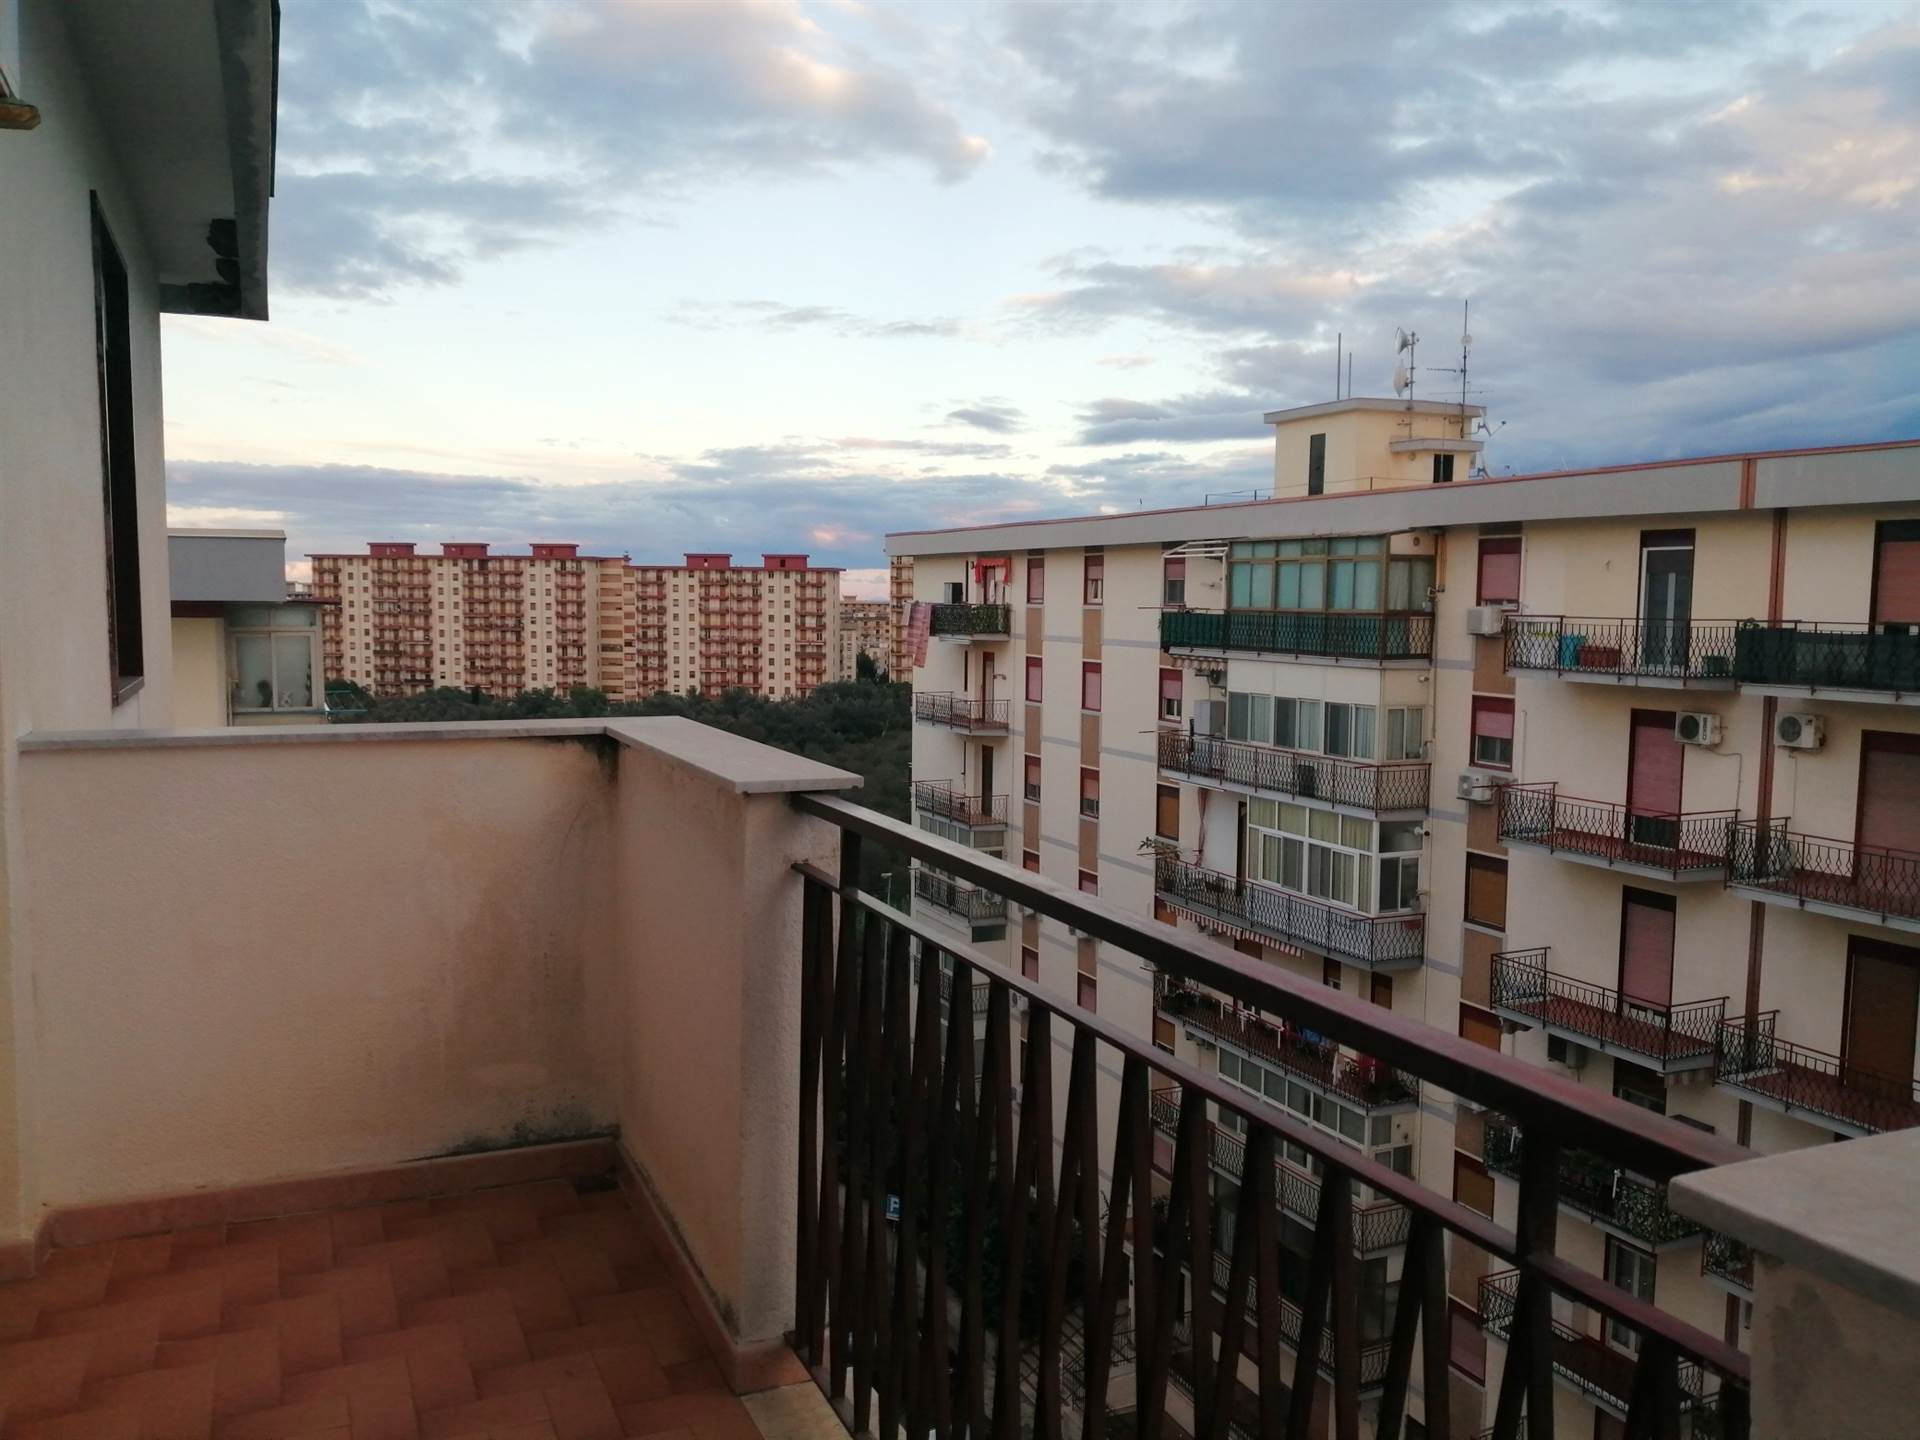 ORETO NUOVA - ORSA MINORE, PALERMO, Apartment for sale of 117 Sq. mt., Habitable, Heating Individual heating system, Energetic class: G, placed at 6° 